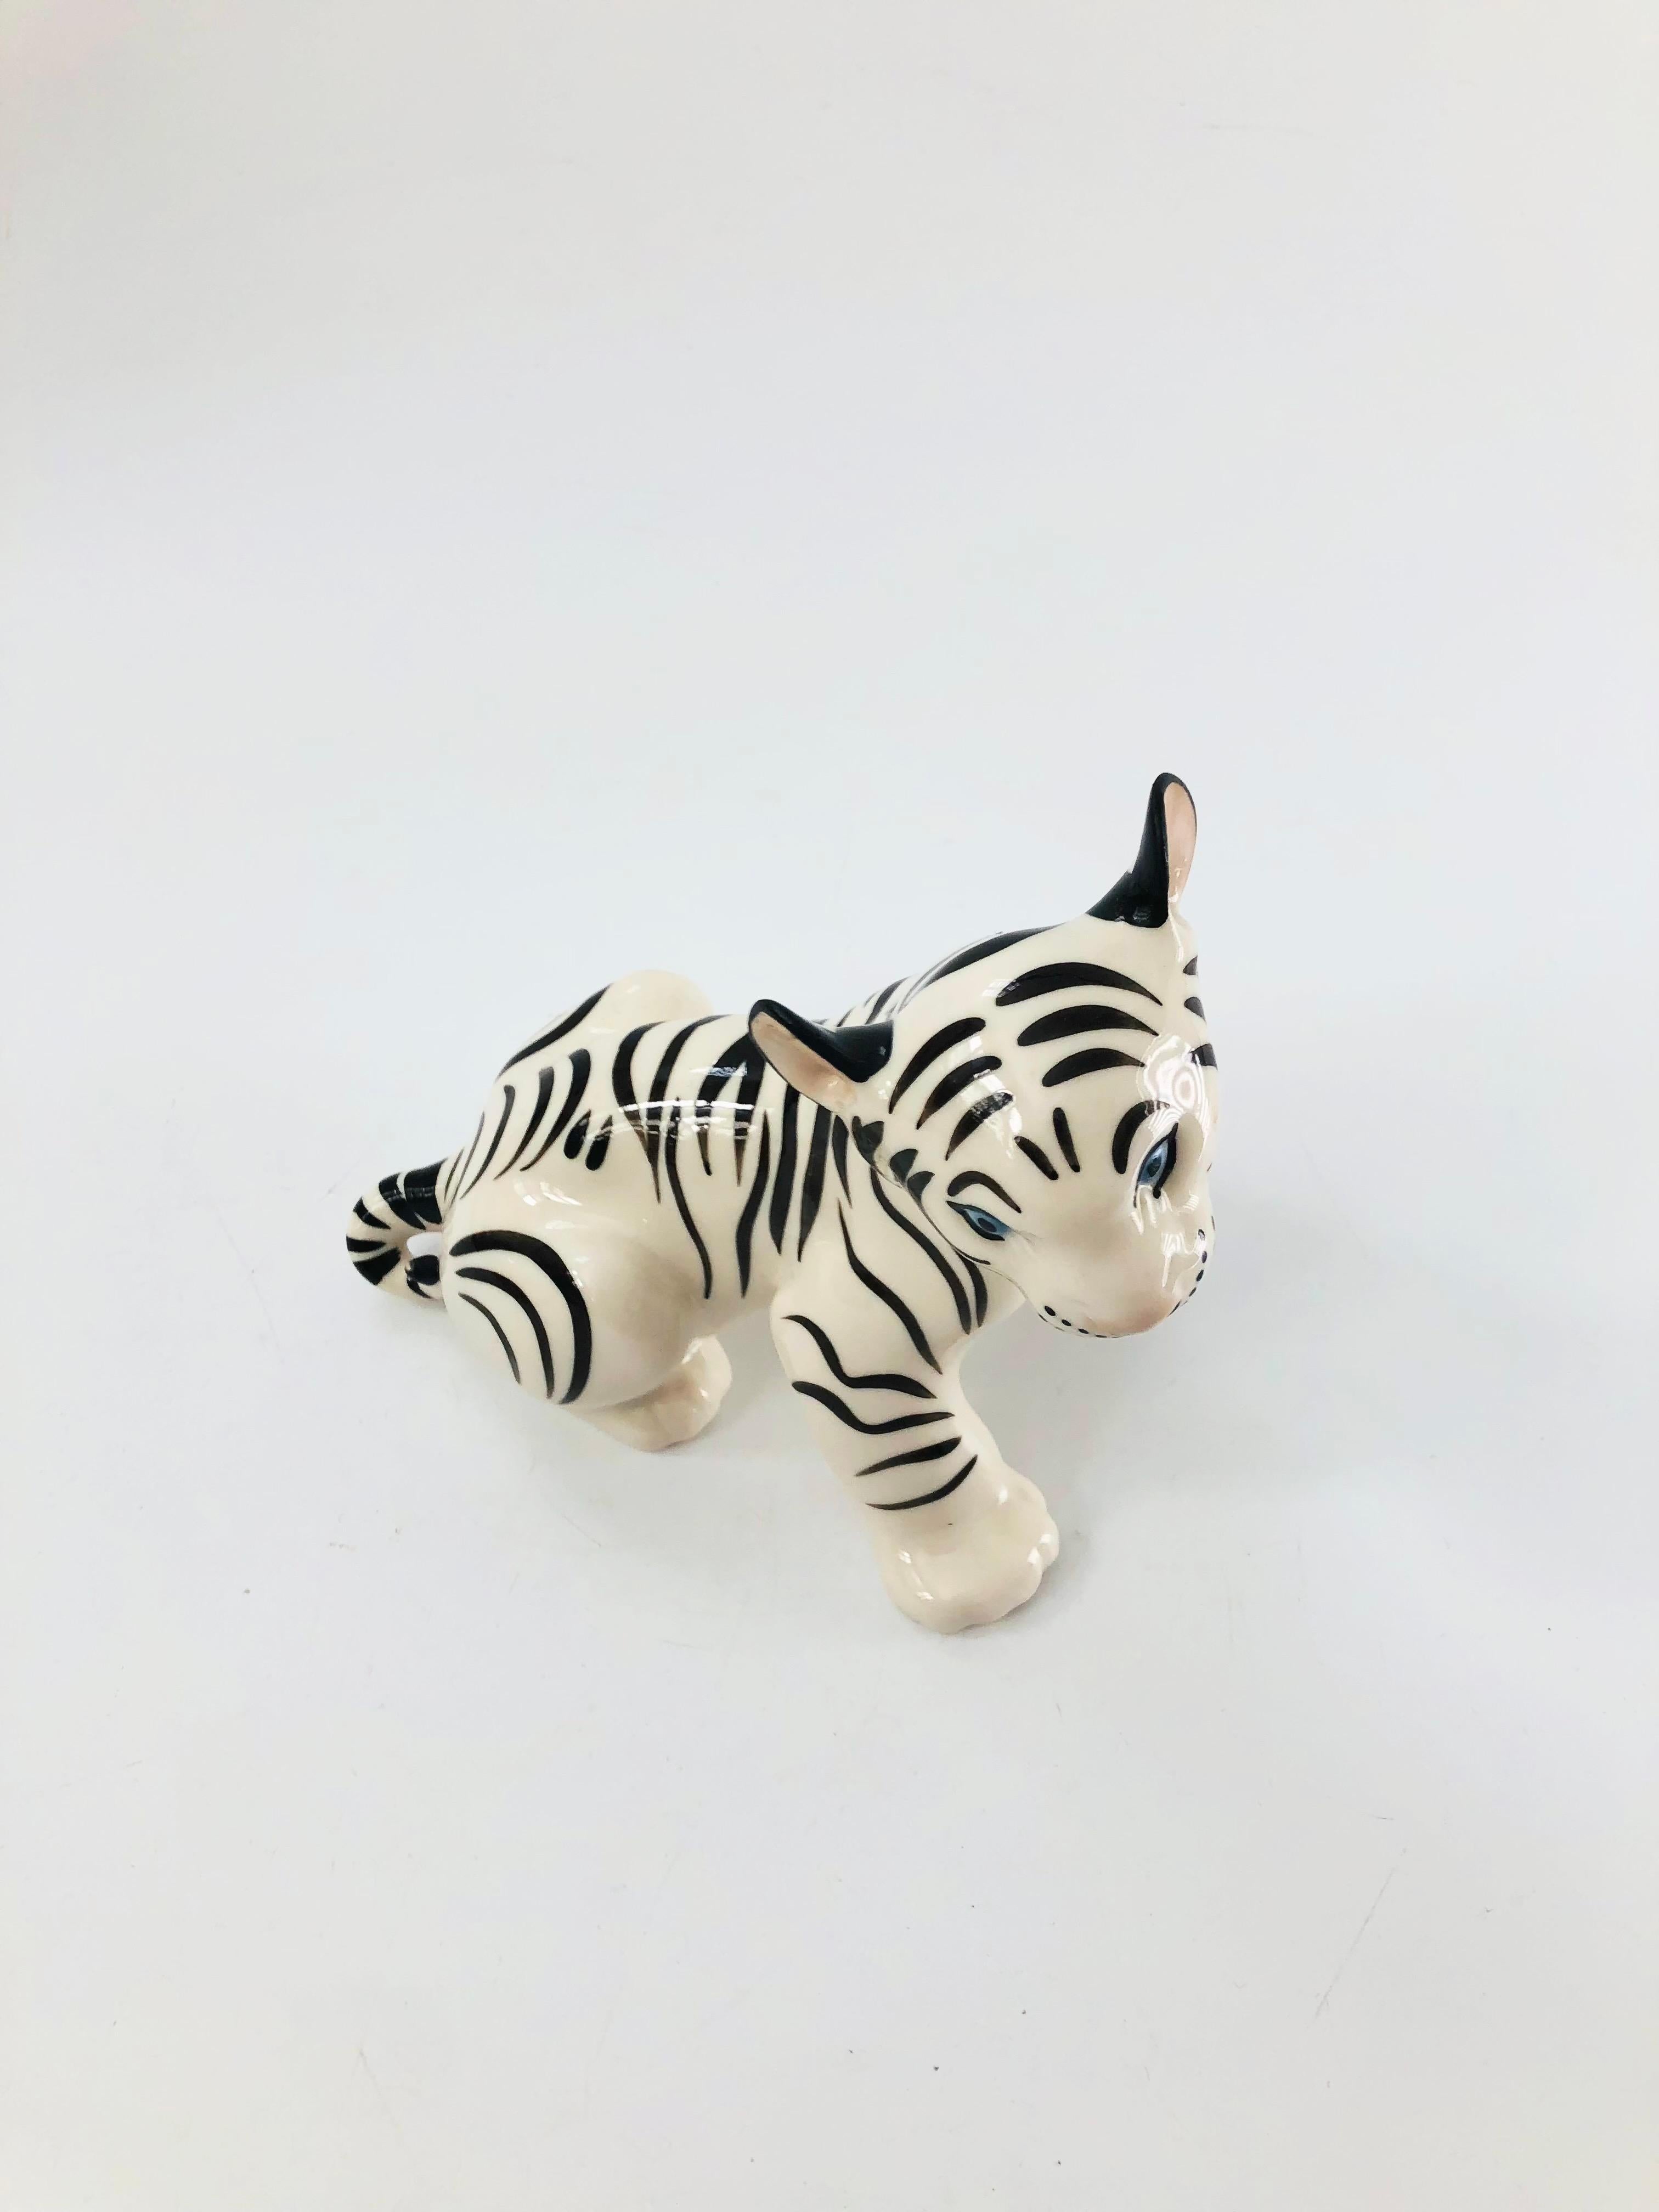 A vintage porcelain figurine of a white tiger by Lomonosov. Made in Russia. Lovely details with blue eyes and painted black stripes. Marked on the base with the blue Lomonosov mark.

